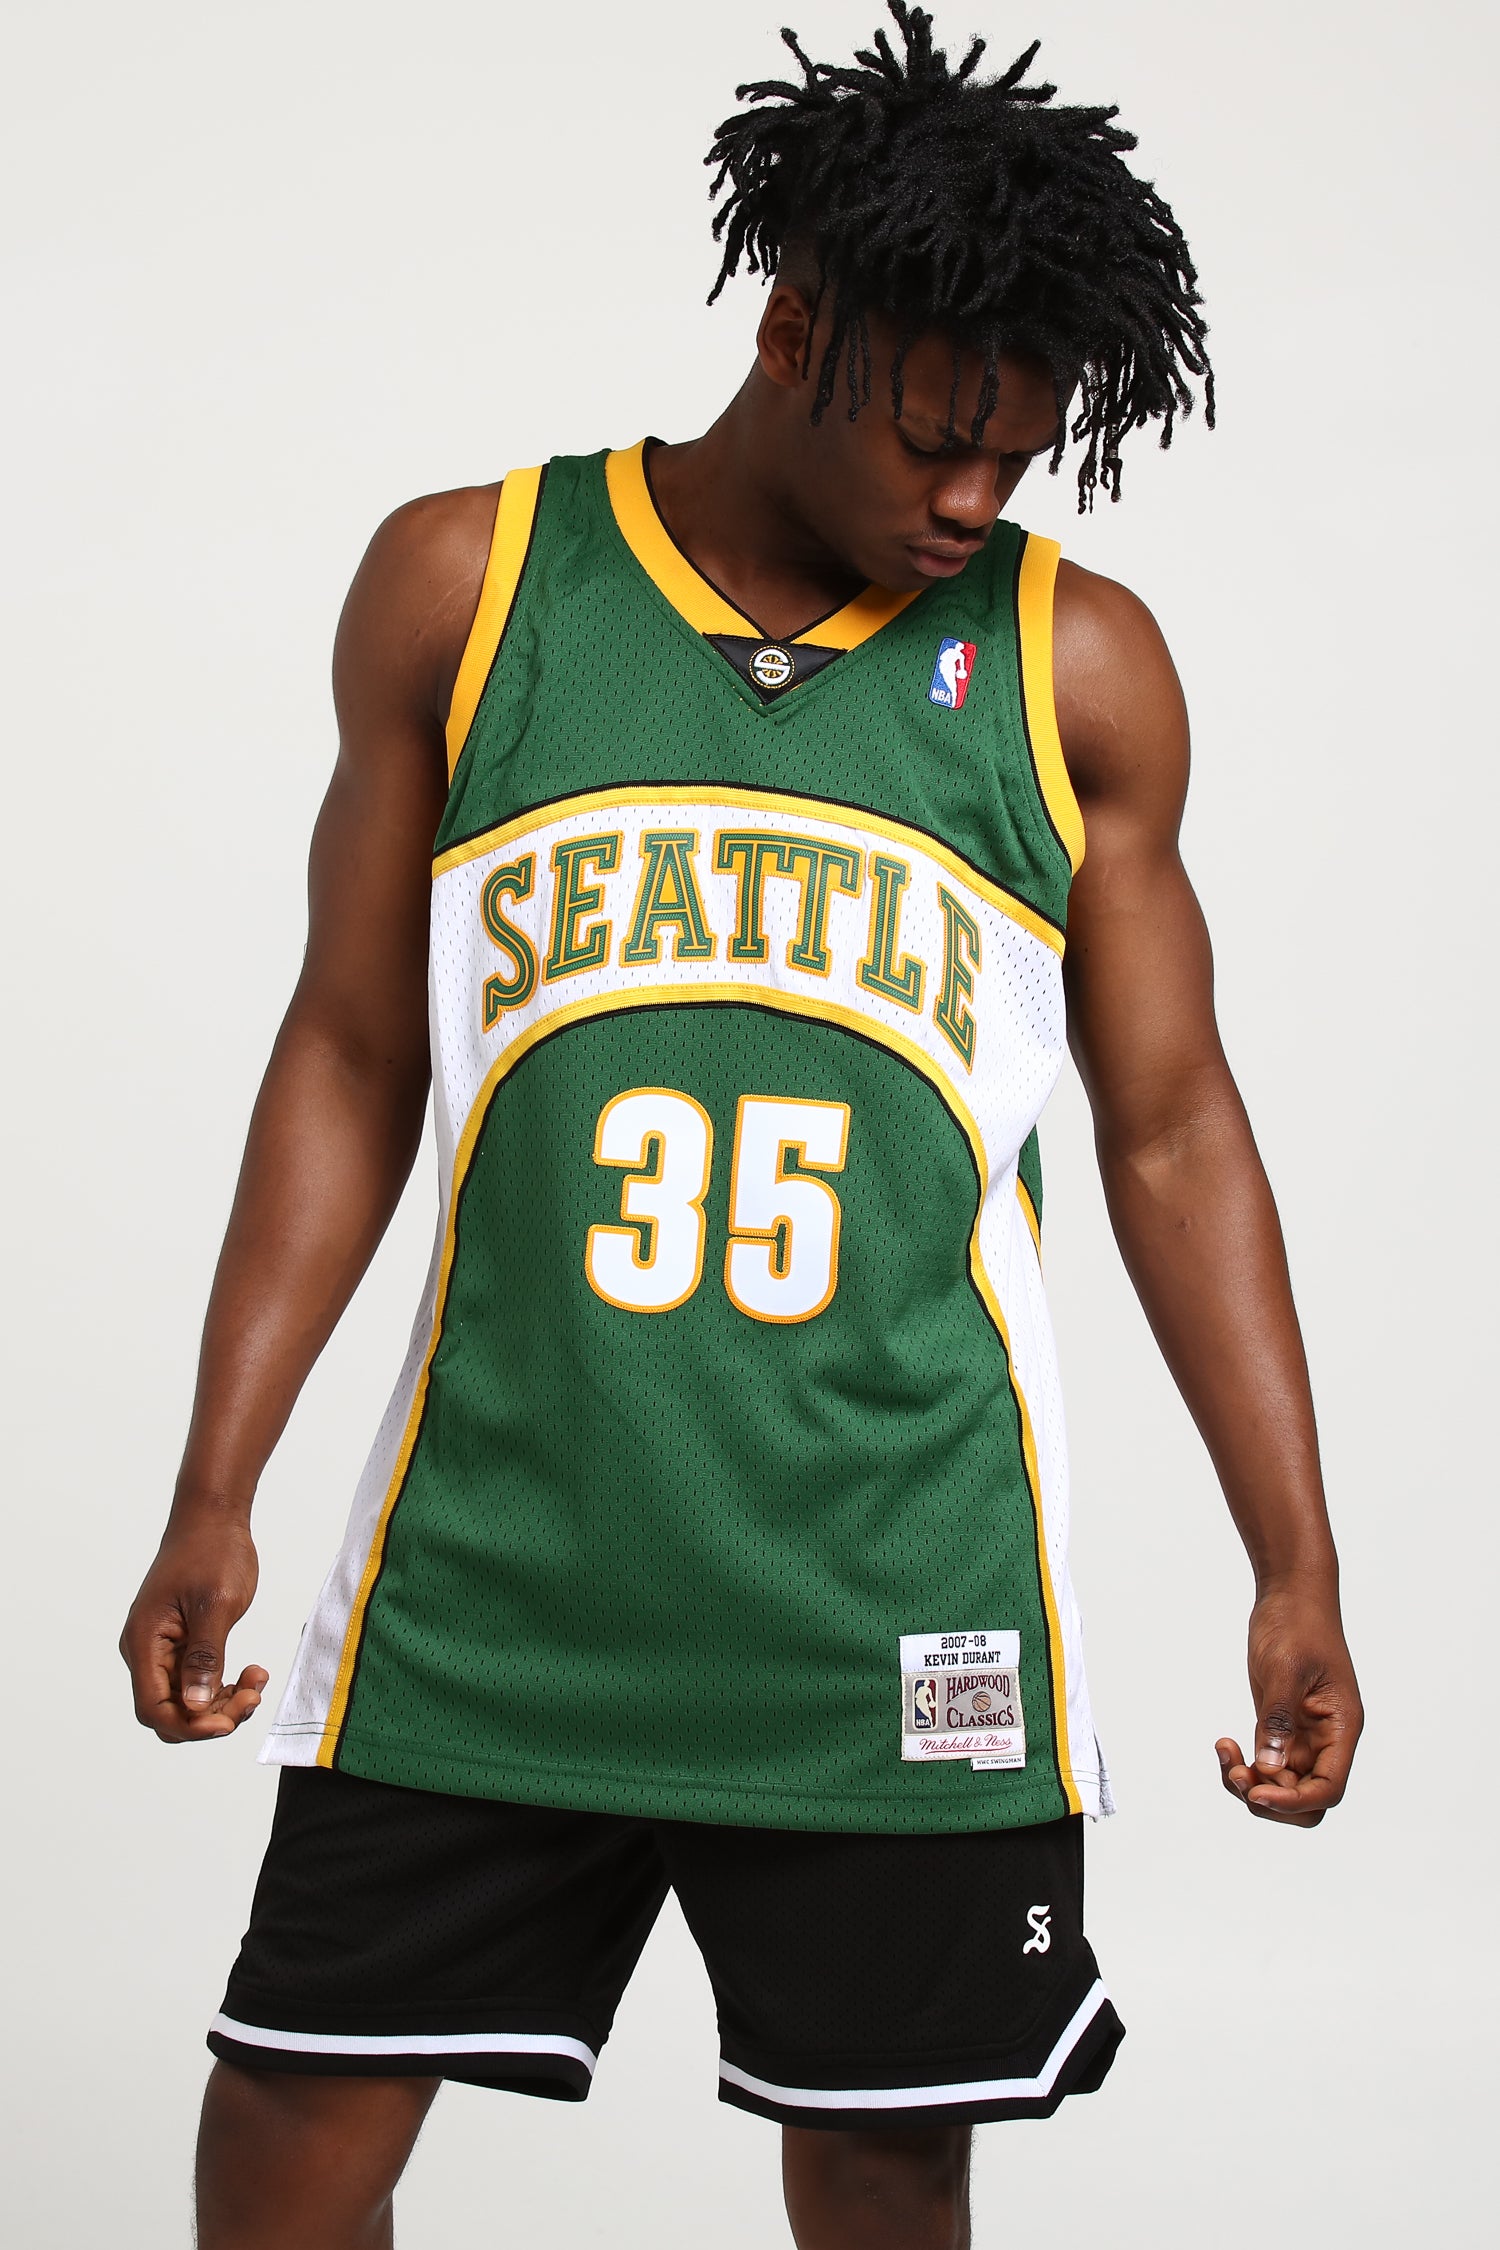 seattle supersonics durant jersey